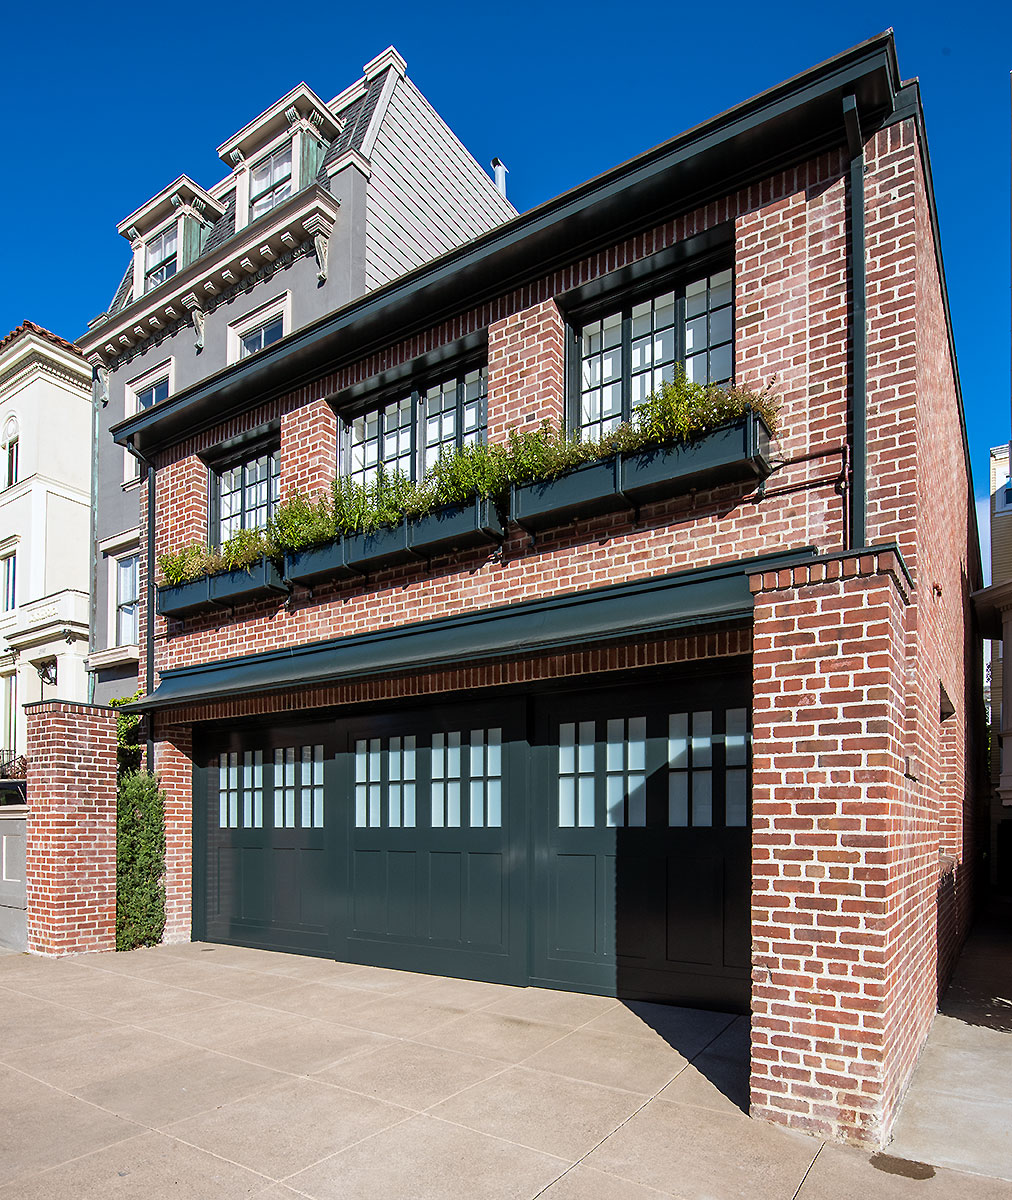 Carriage House at 2974 Pacific Avenue in Pacific Heights, designed by Julia Morgan, built 1916